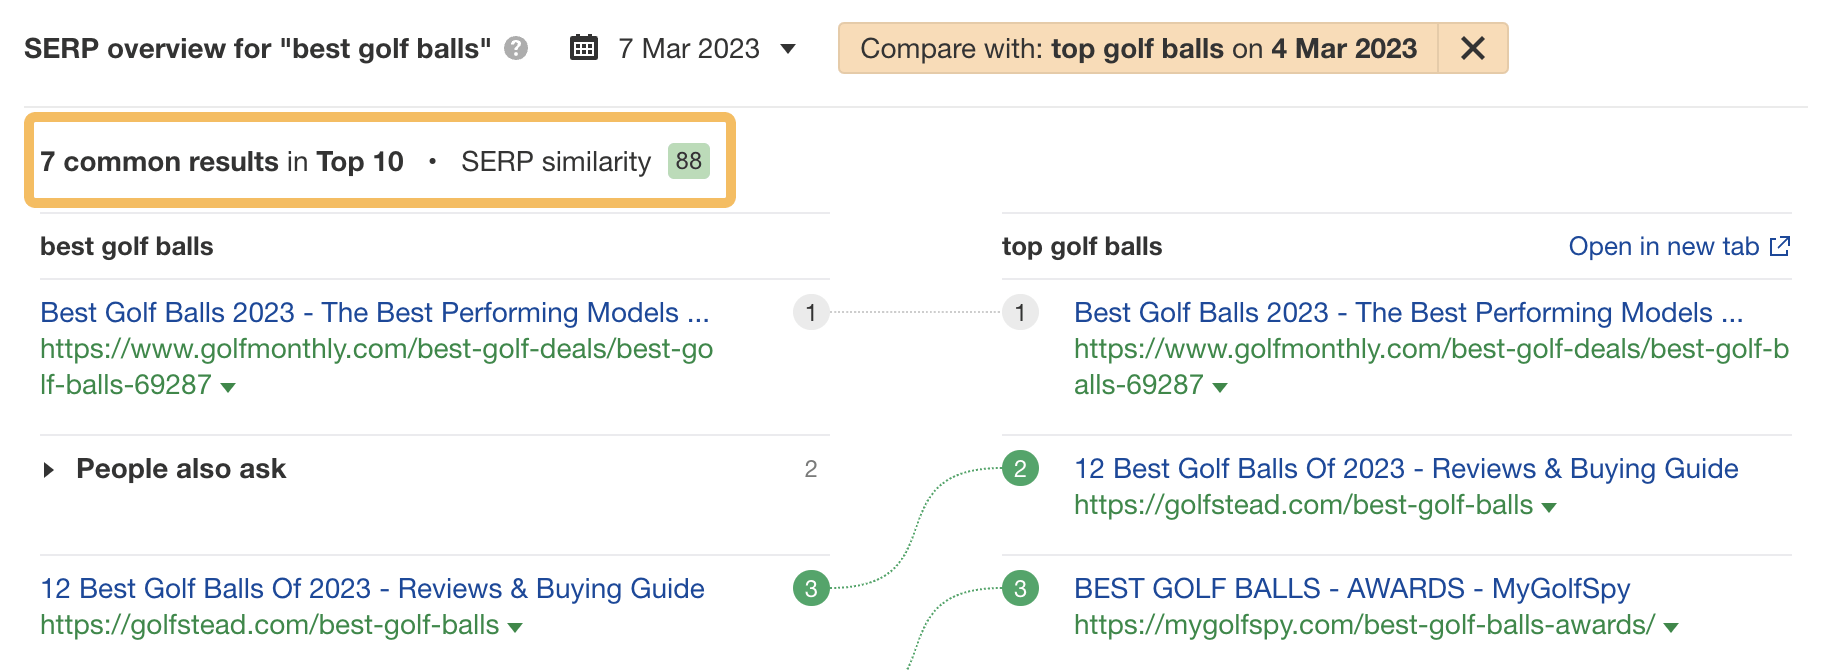 SERP similarity score of 88/100 for "best golf balls" and "top golf balls"
